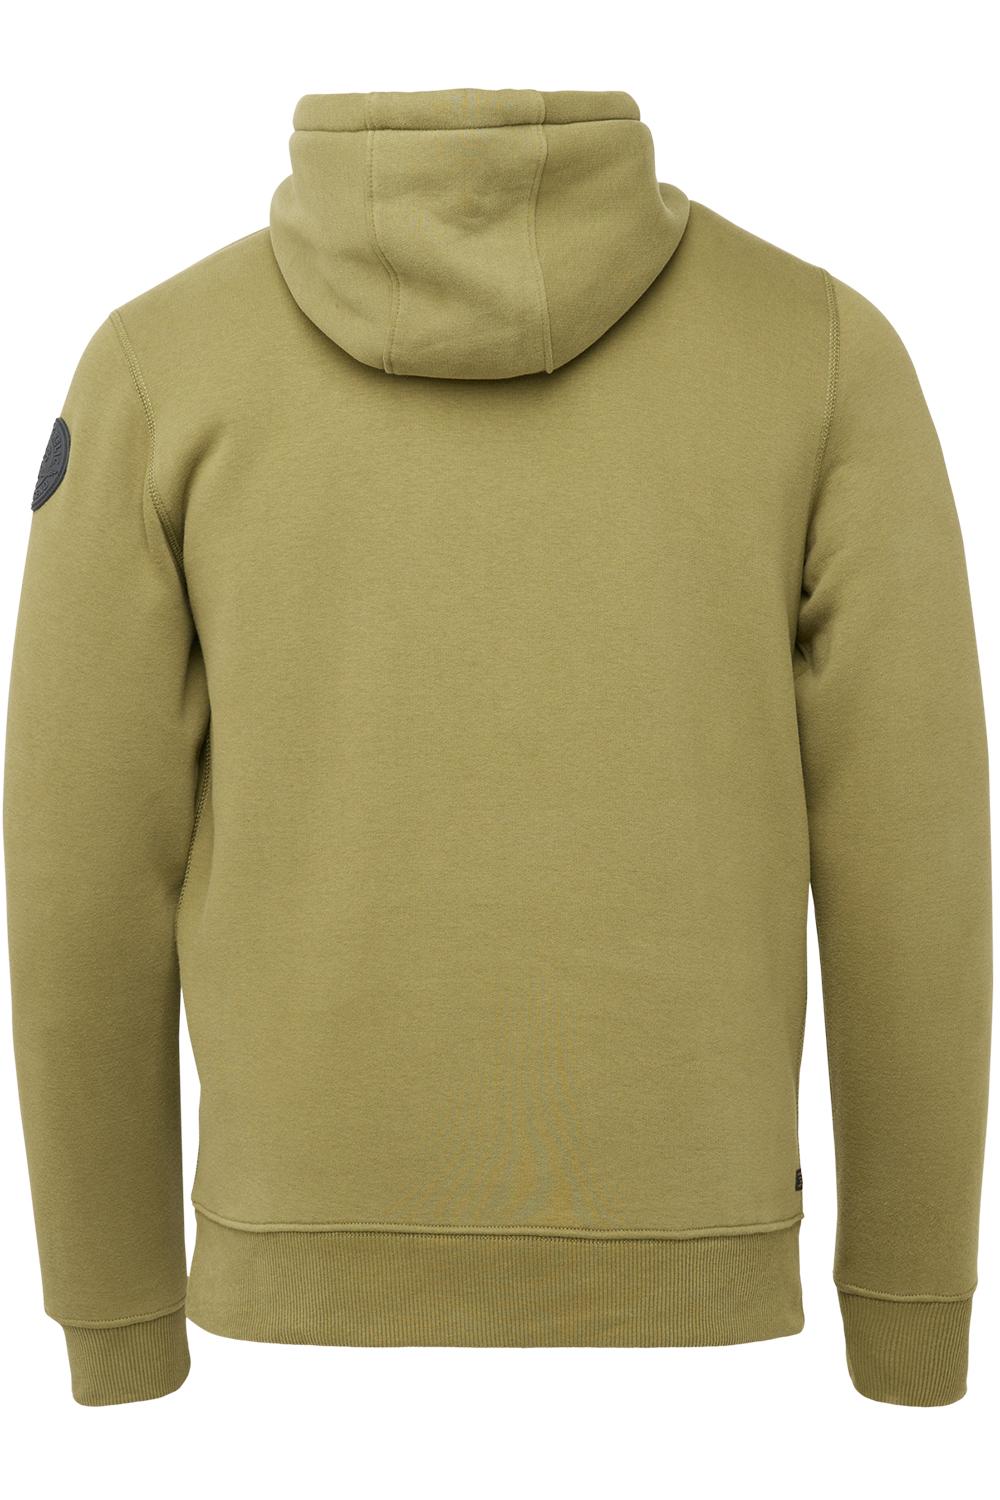 hooded sweater psw217440 pme legend 6381